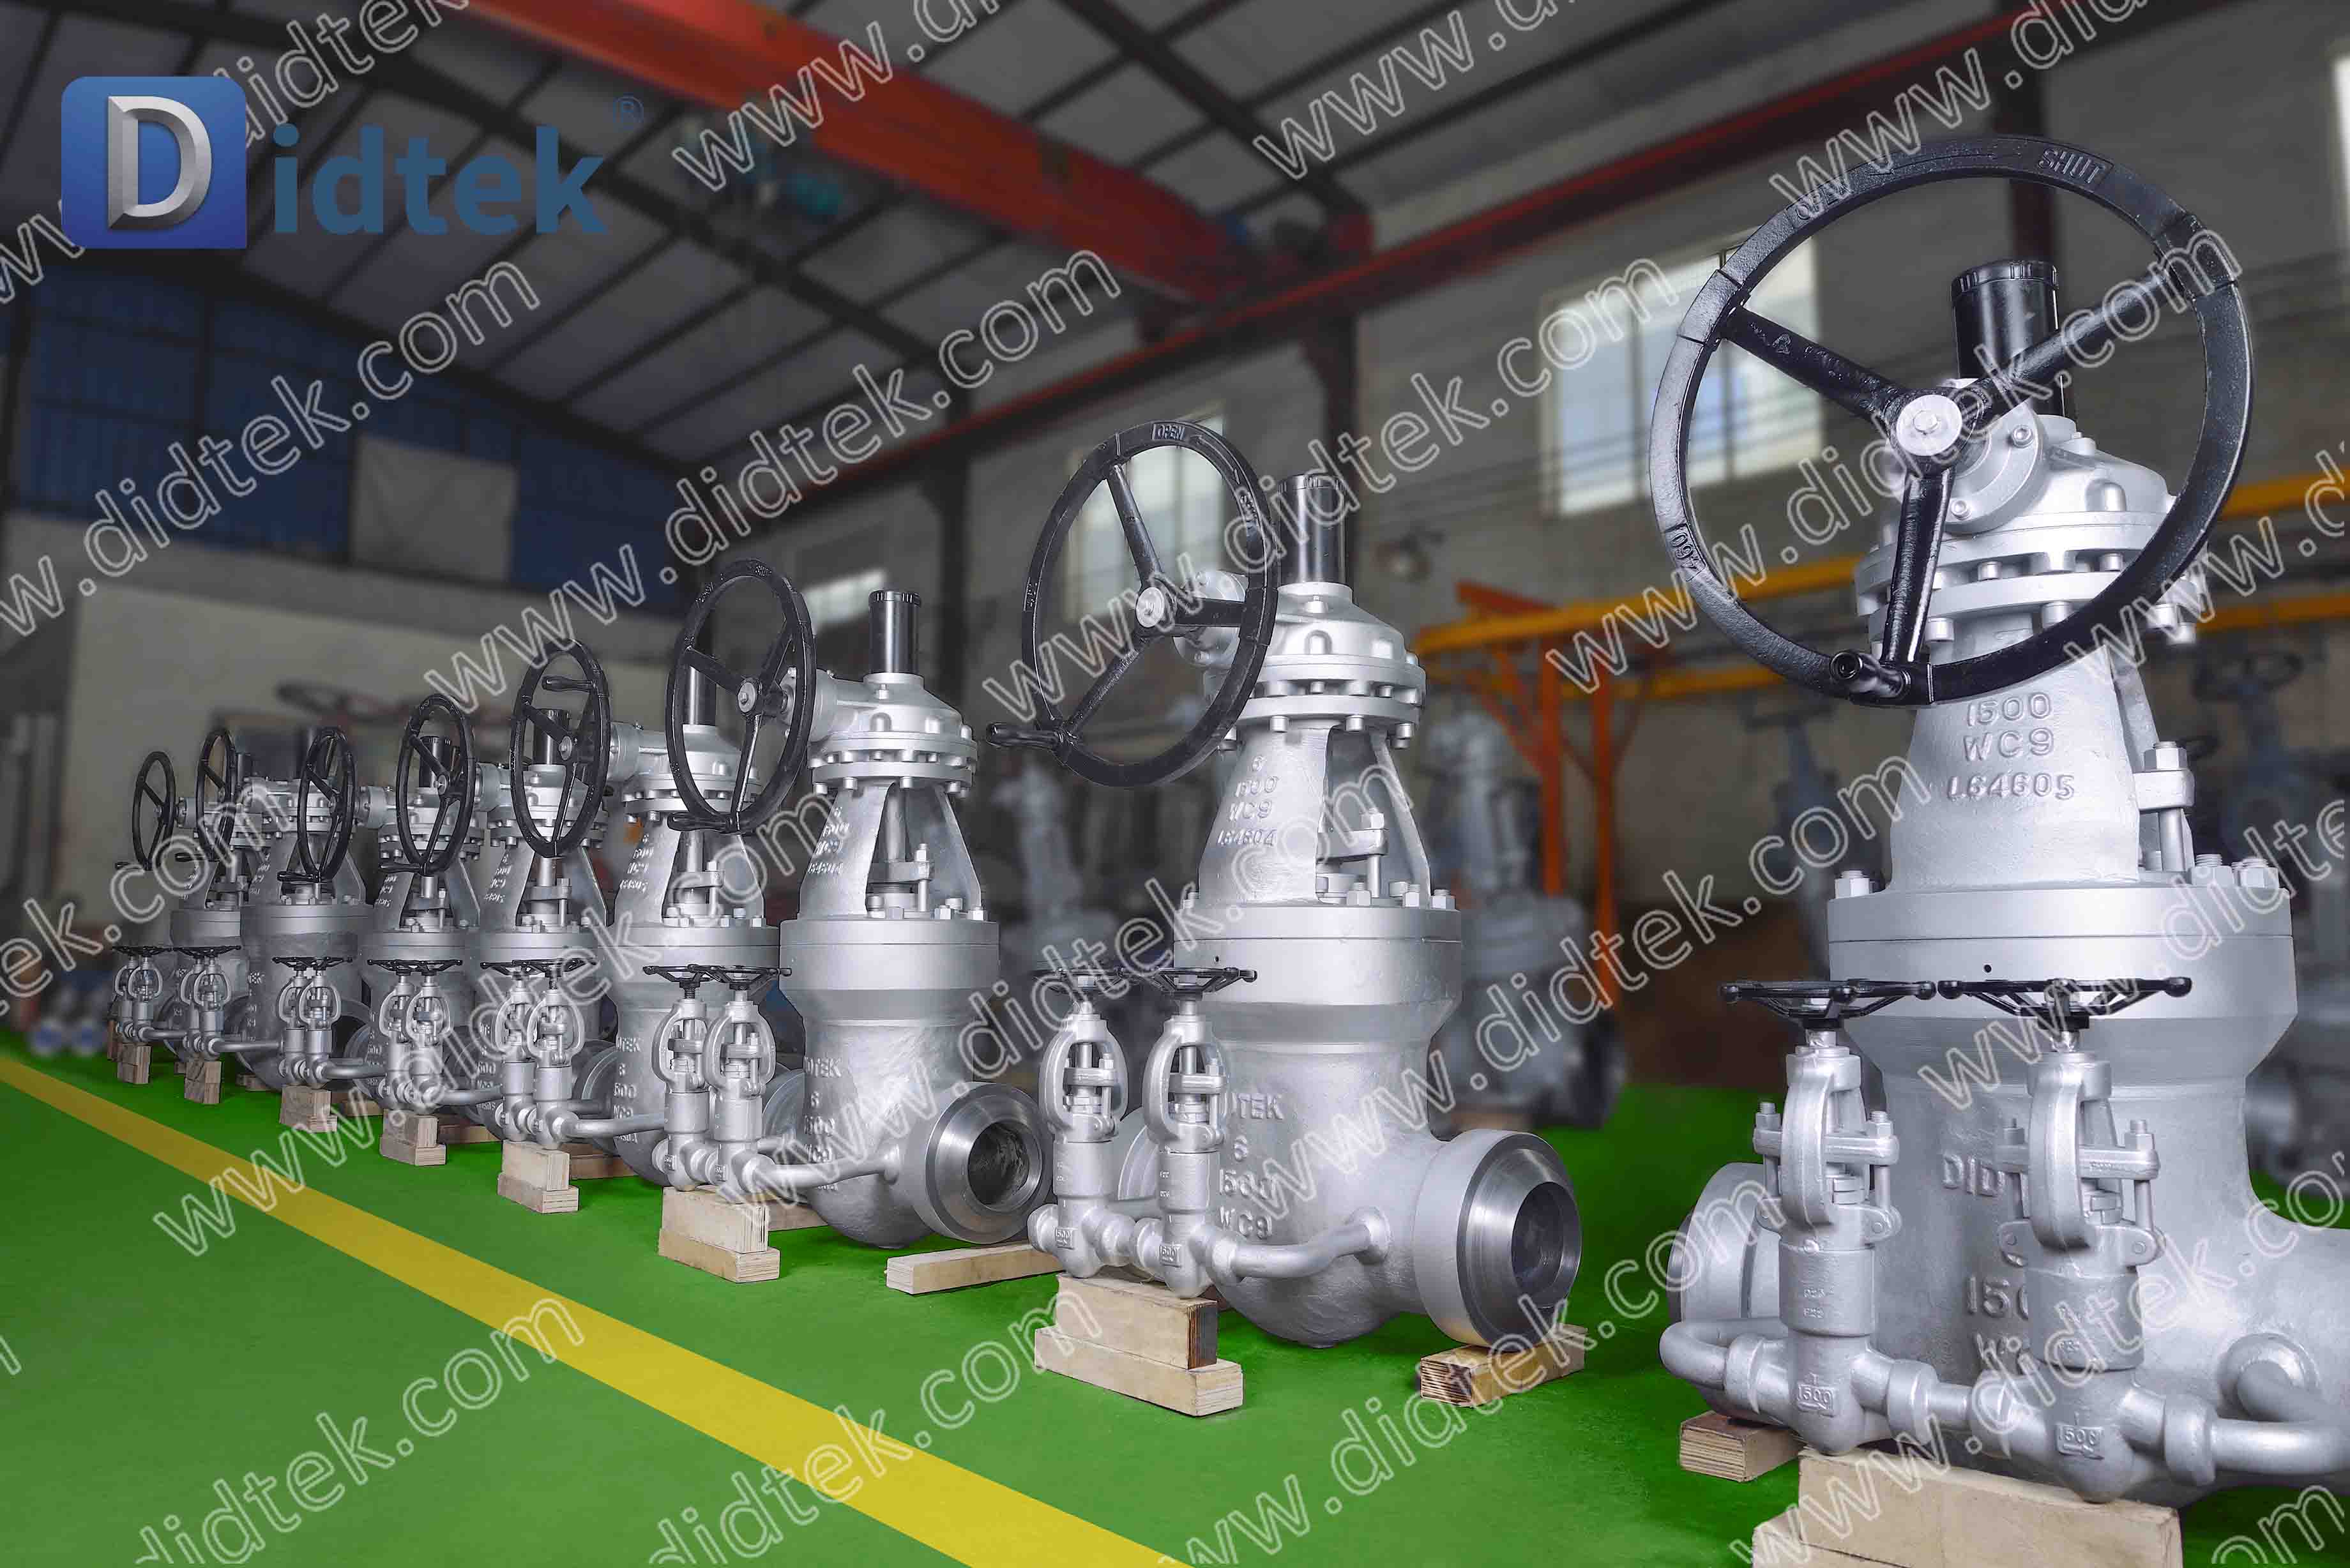 A-12 DIDTEKCSGV Cast Steel Gate Valve-Oil Refinery High Pressure Temperature WC9 Chrome Moly PSB Gate Valve With F22 Bypass